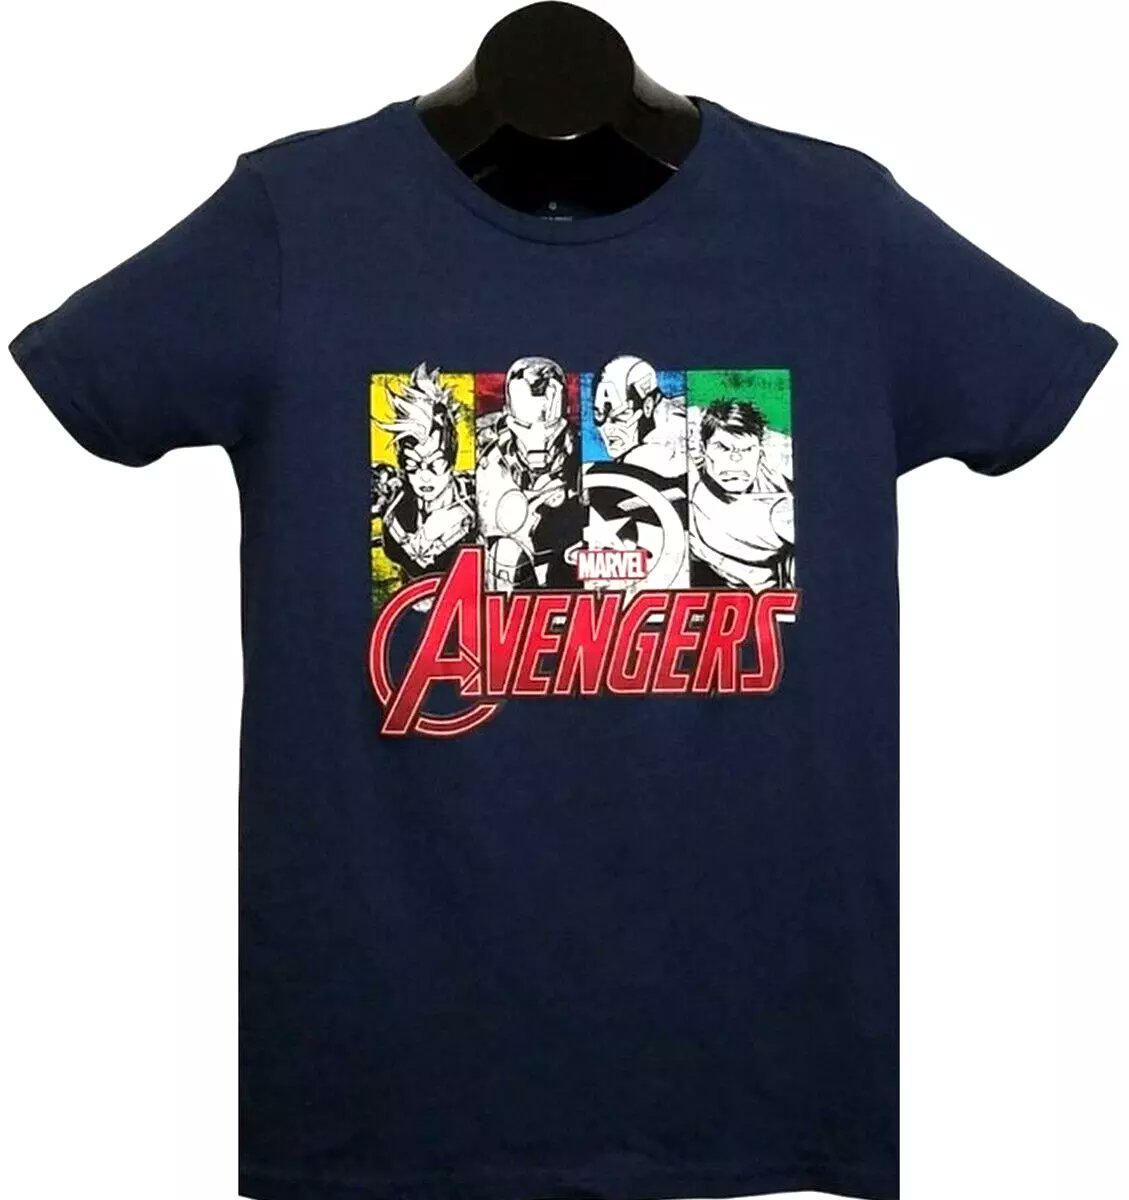 Check out Marvel Avengers Men Short Sleeve Navy Graphic T-Shirt (U.S. Size: Large) NWT ebay.com/itm/1864541291… #eBay via @eBay 

#ebay #ebayseller #reseller #resellercommunity #ebaystore #ebayreseller #ebaycommunity #fashion #forsale #thrifting #thrift #resellerlife #sale